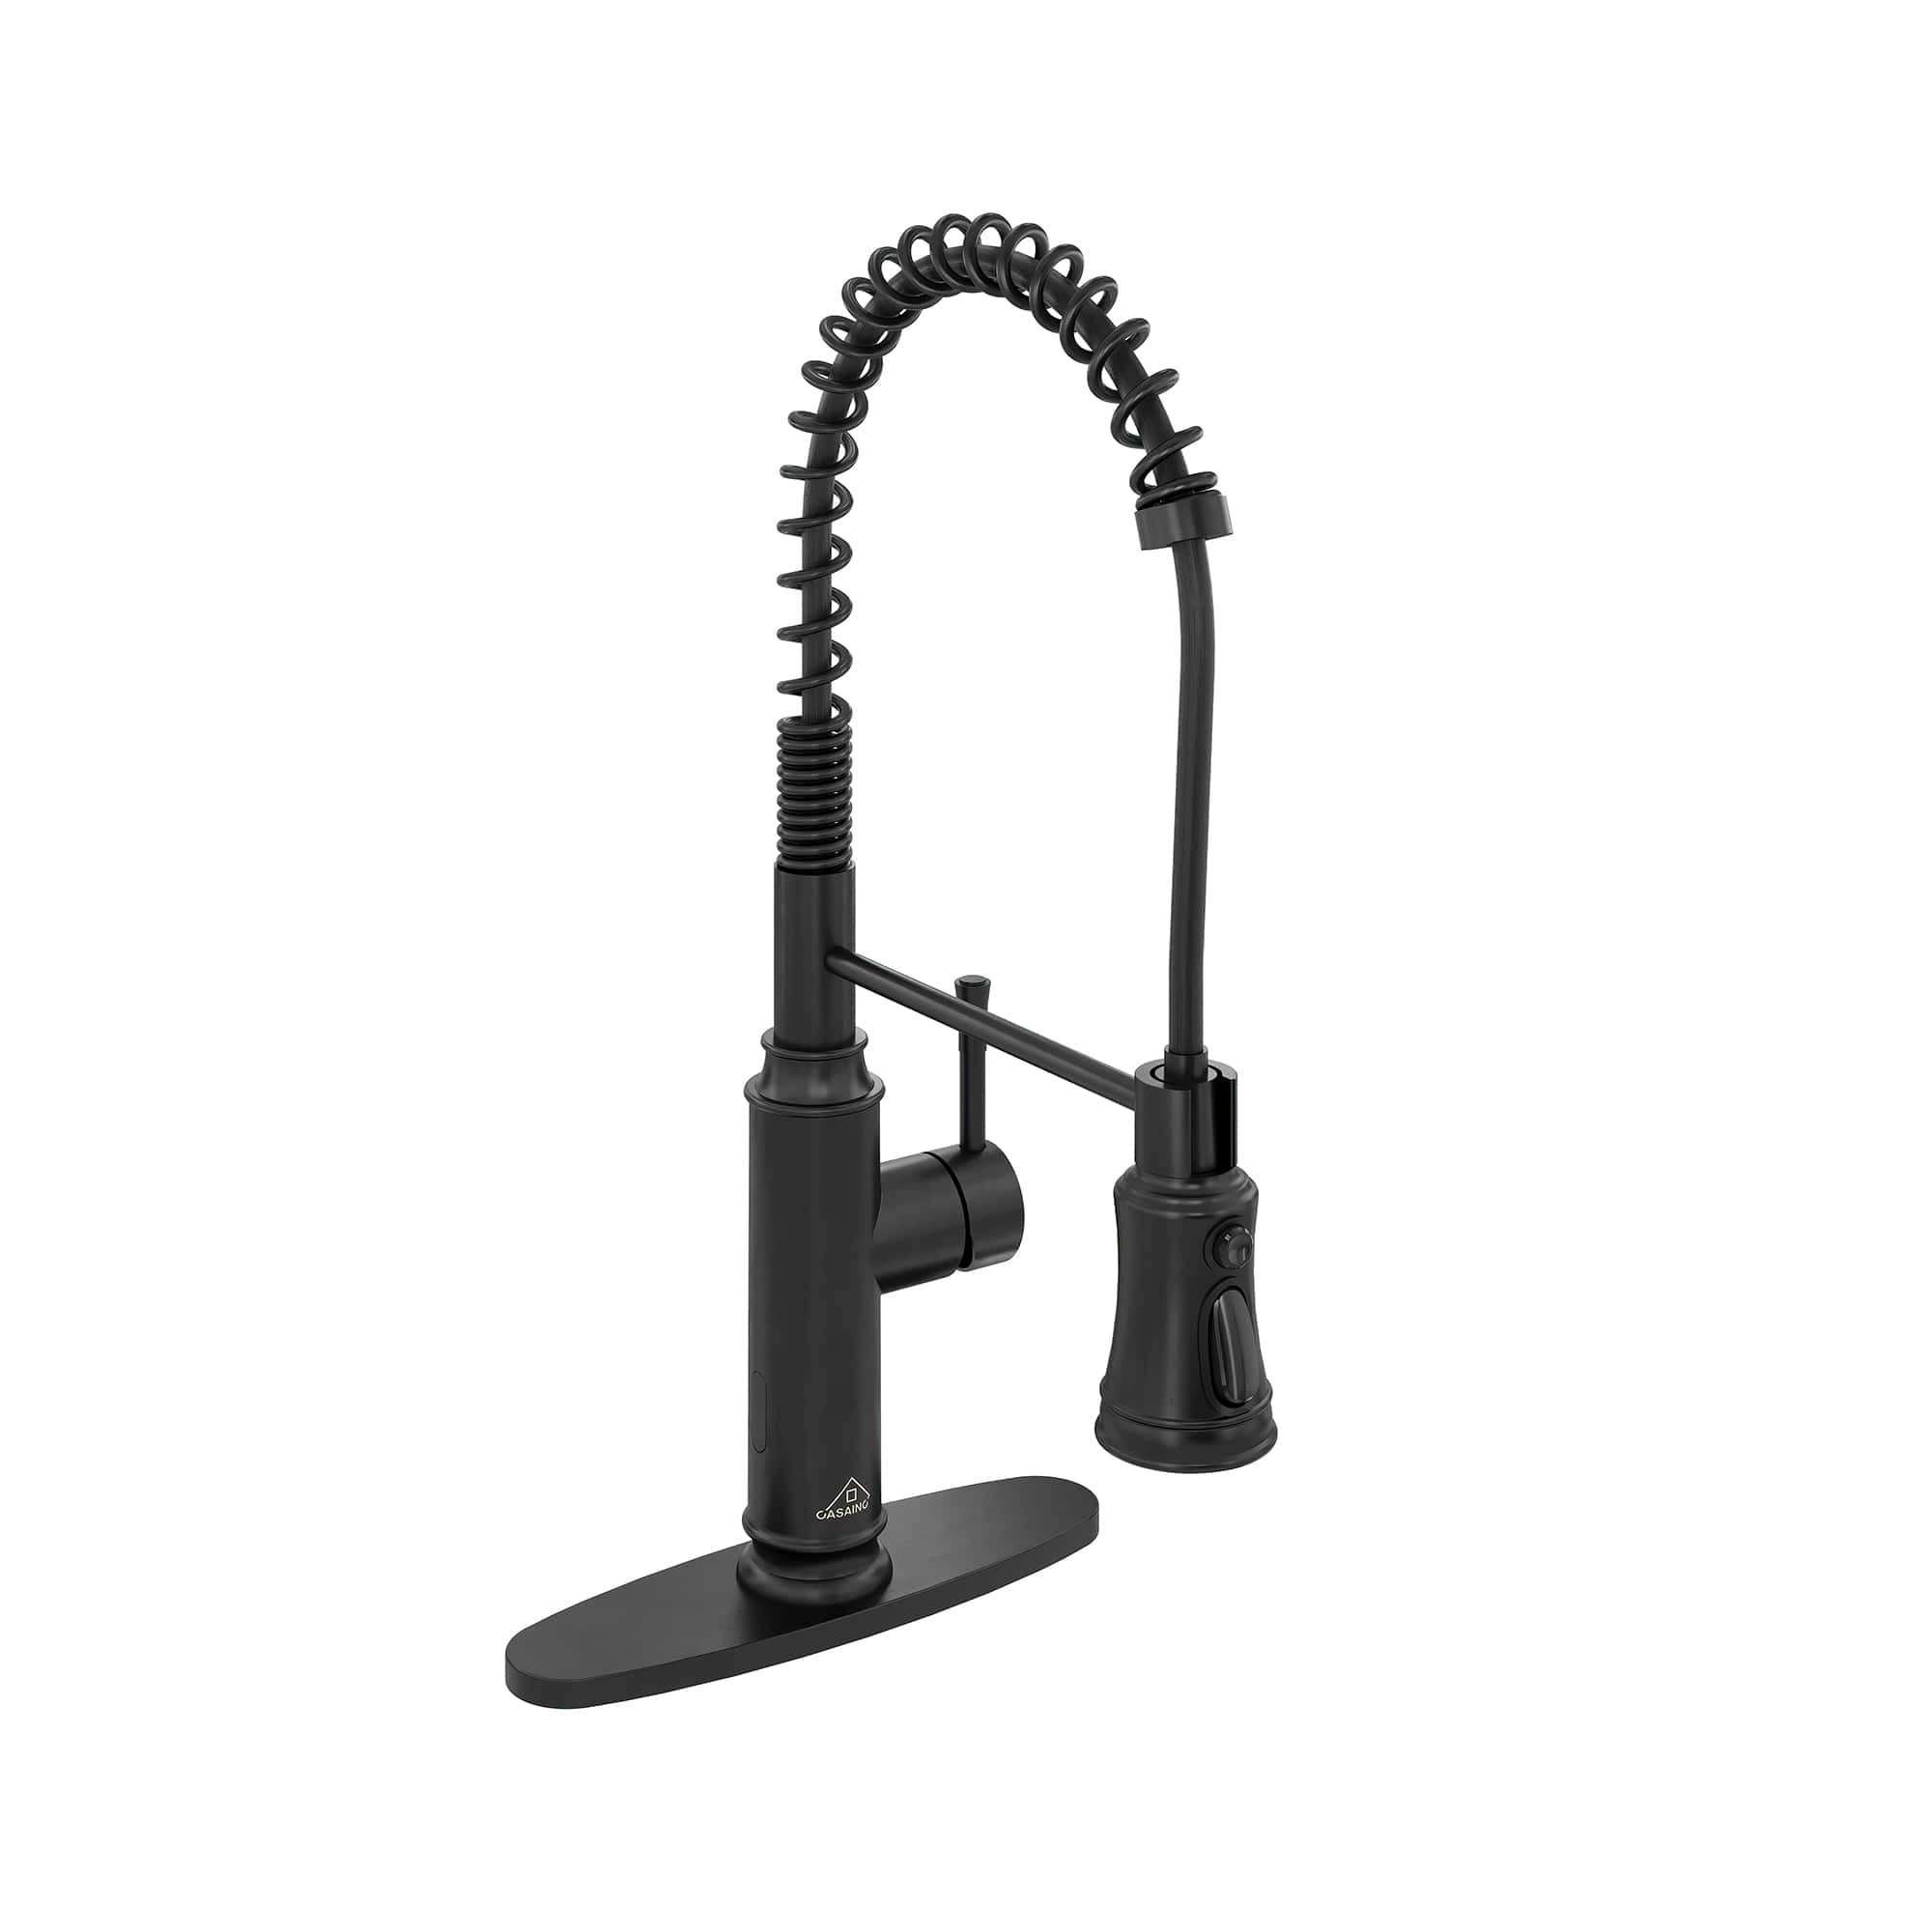 CASAINC 1.8GPM Spring Pull Kitchen Faucet in Matte Black and More